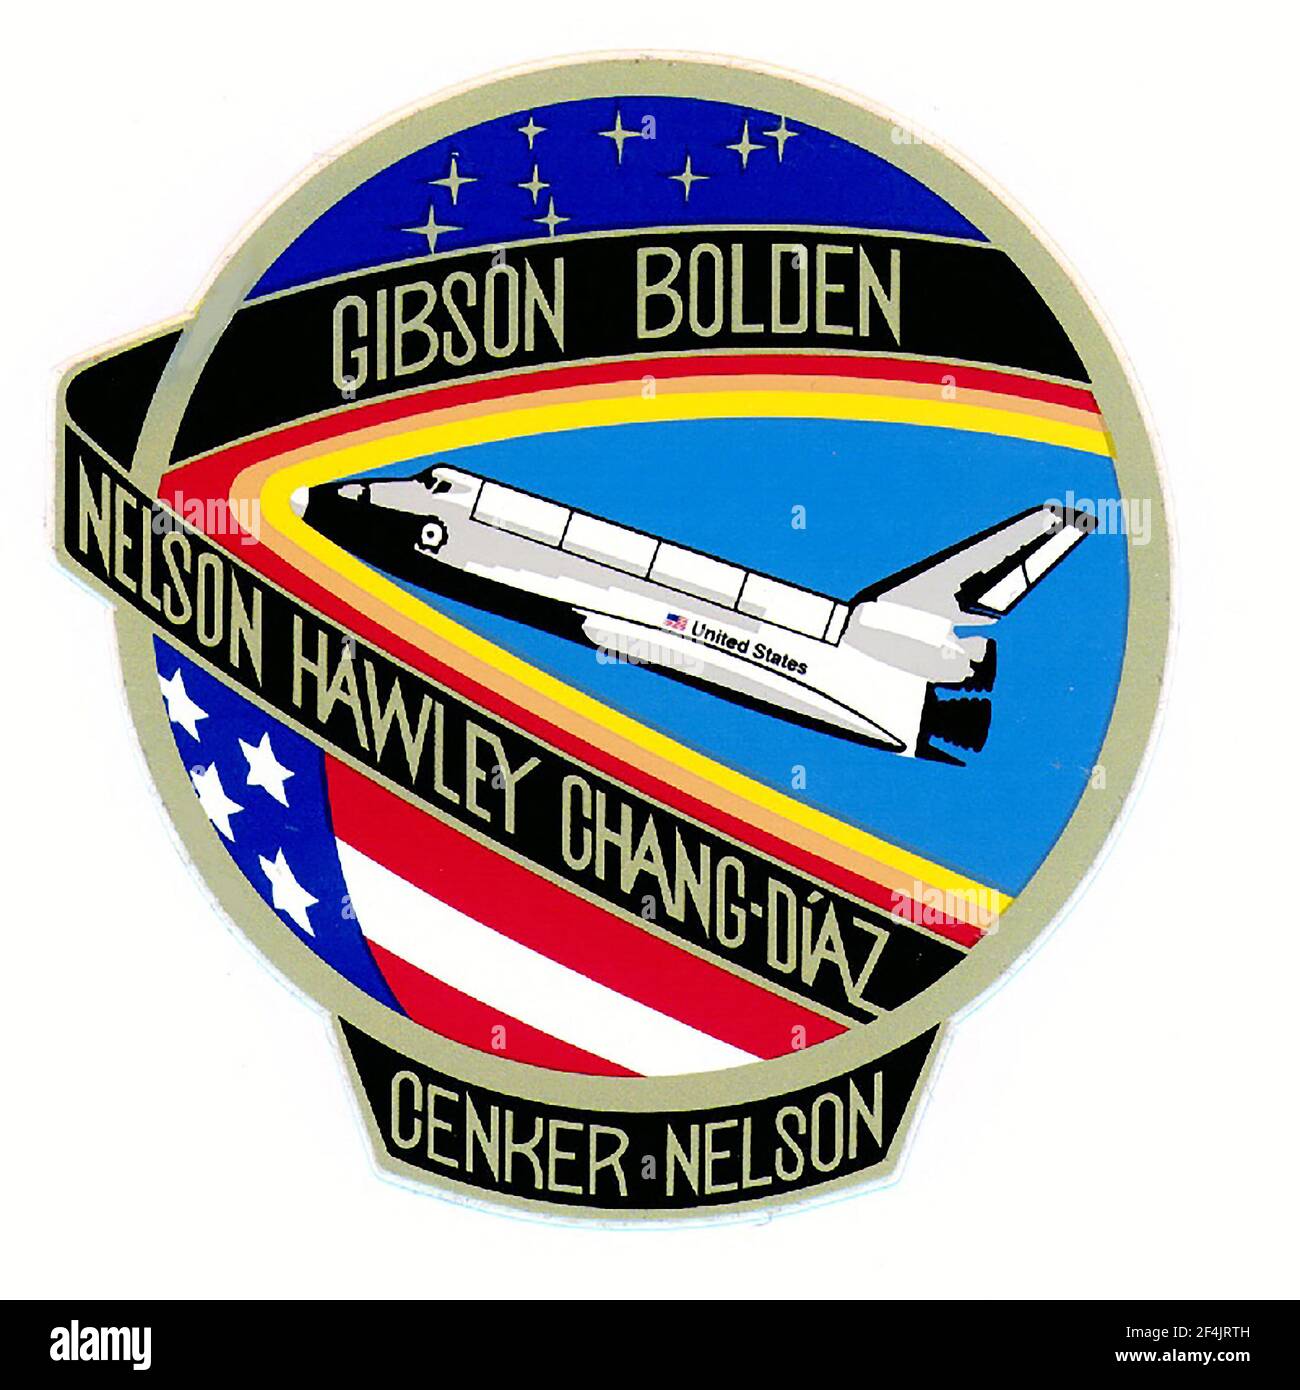 File photo - Mission Patch for Space Shuttle Columbia STS-61C Mission that was launched on January 12, 1986 from the John F. Kennedy Space Center, Florida and landed onJanuary 18, 1986 at Edwards Air Force Base, California The astronauts aboard were: Robert L. Gibson, Charles F. Bolden, Jr., Franklin R. Chang-Diaz, Steven A. Hawley, George D. Nelson, Robert J. Cenker and US Representative Bill Nelson (Democrat of Florida). Several experiments were deployed including the Comet Halley Active Monitoring Program (CHAMP) experiment. On March 19, 2021, United States President Joe Biden announced he Stock Photo